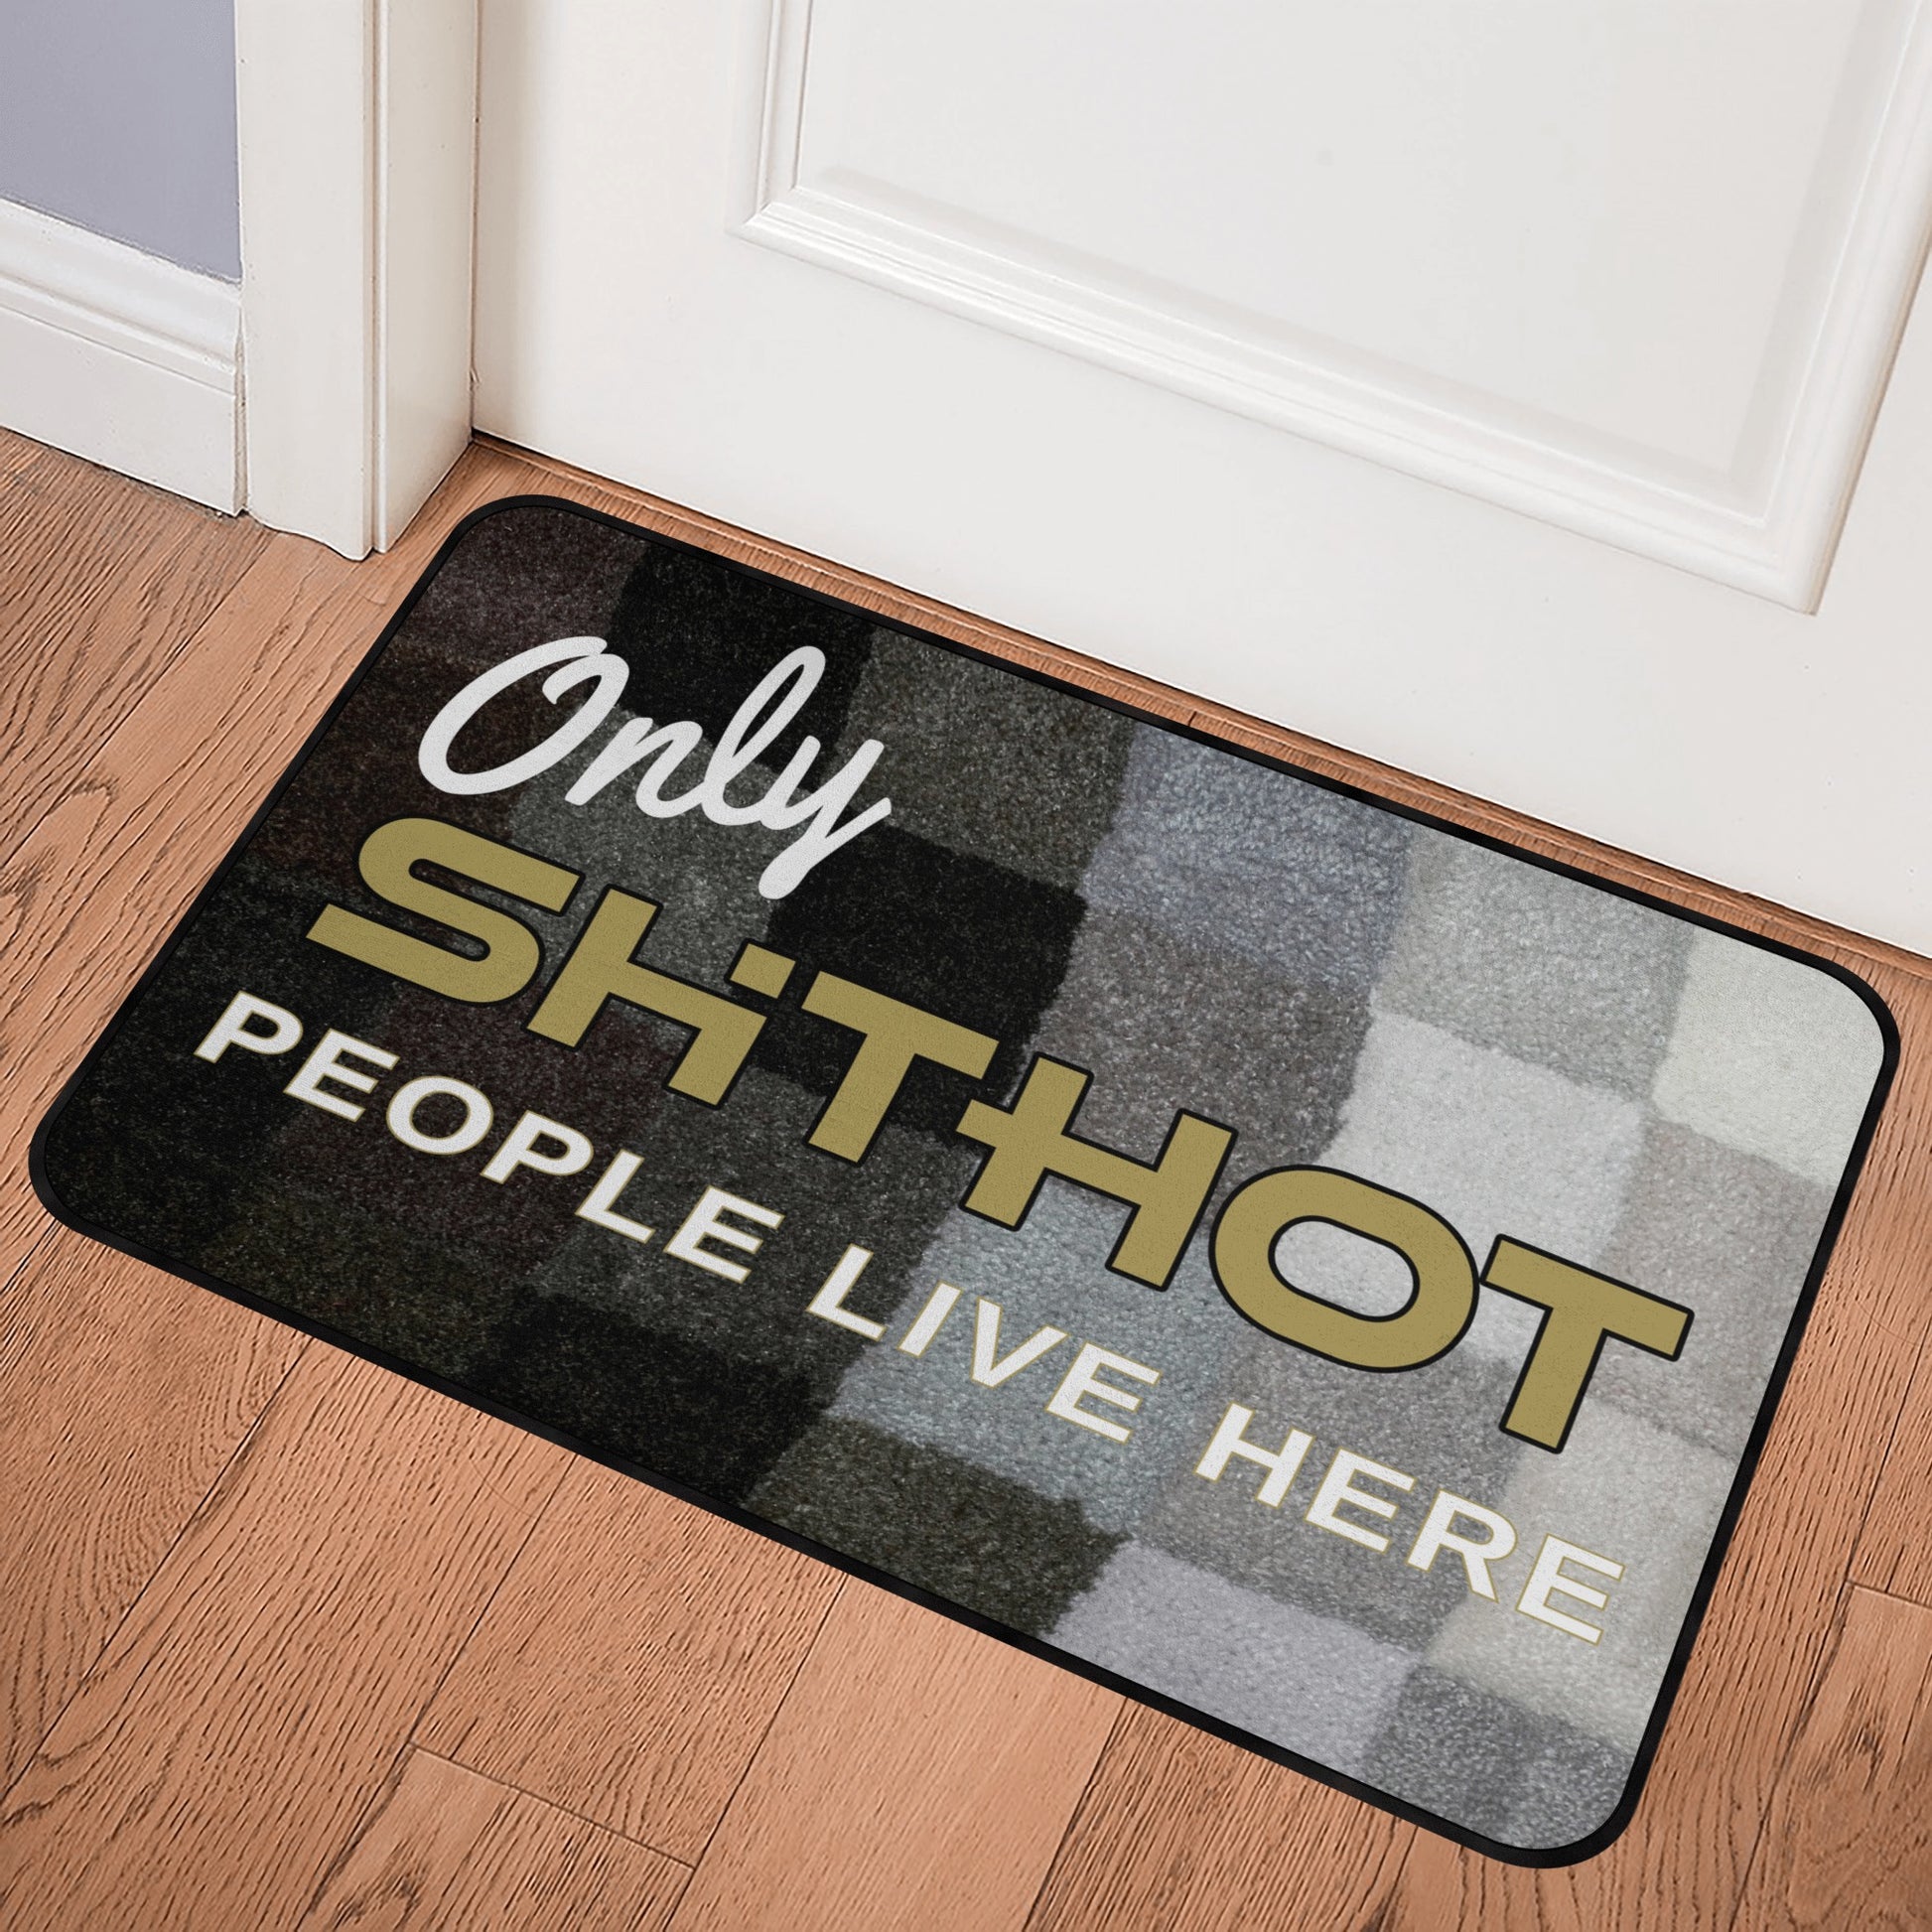 ShitHot Doormat Black & White - Only ShitHot People Live Here